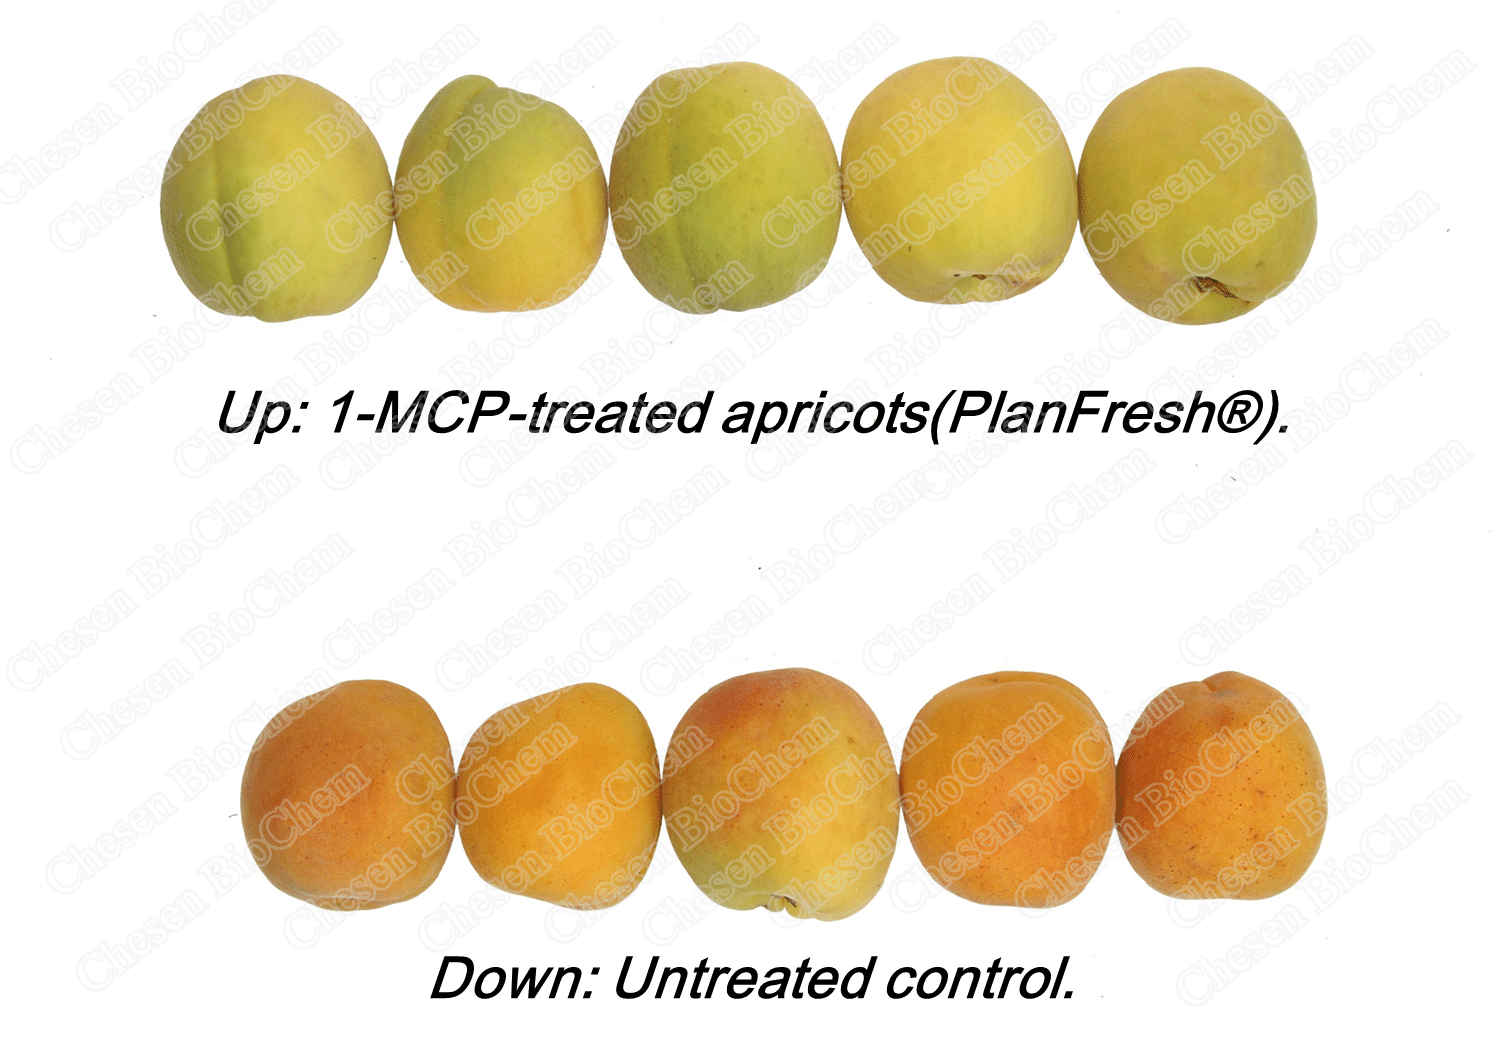 PlanFresh 1-MCP for apricots